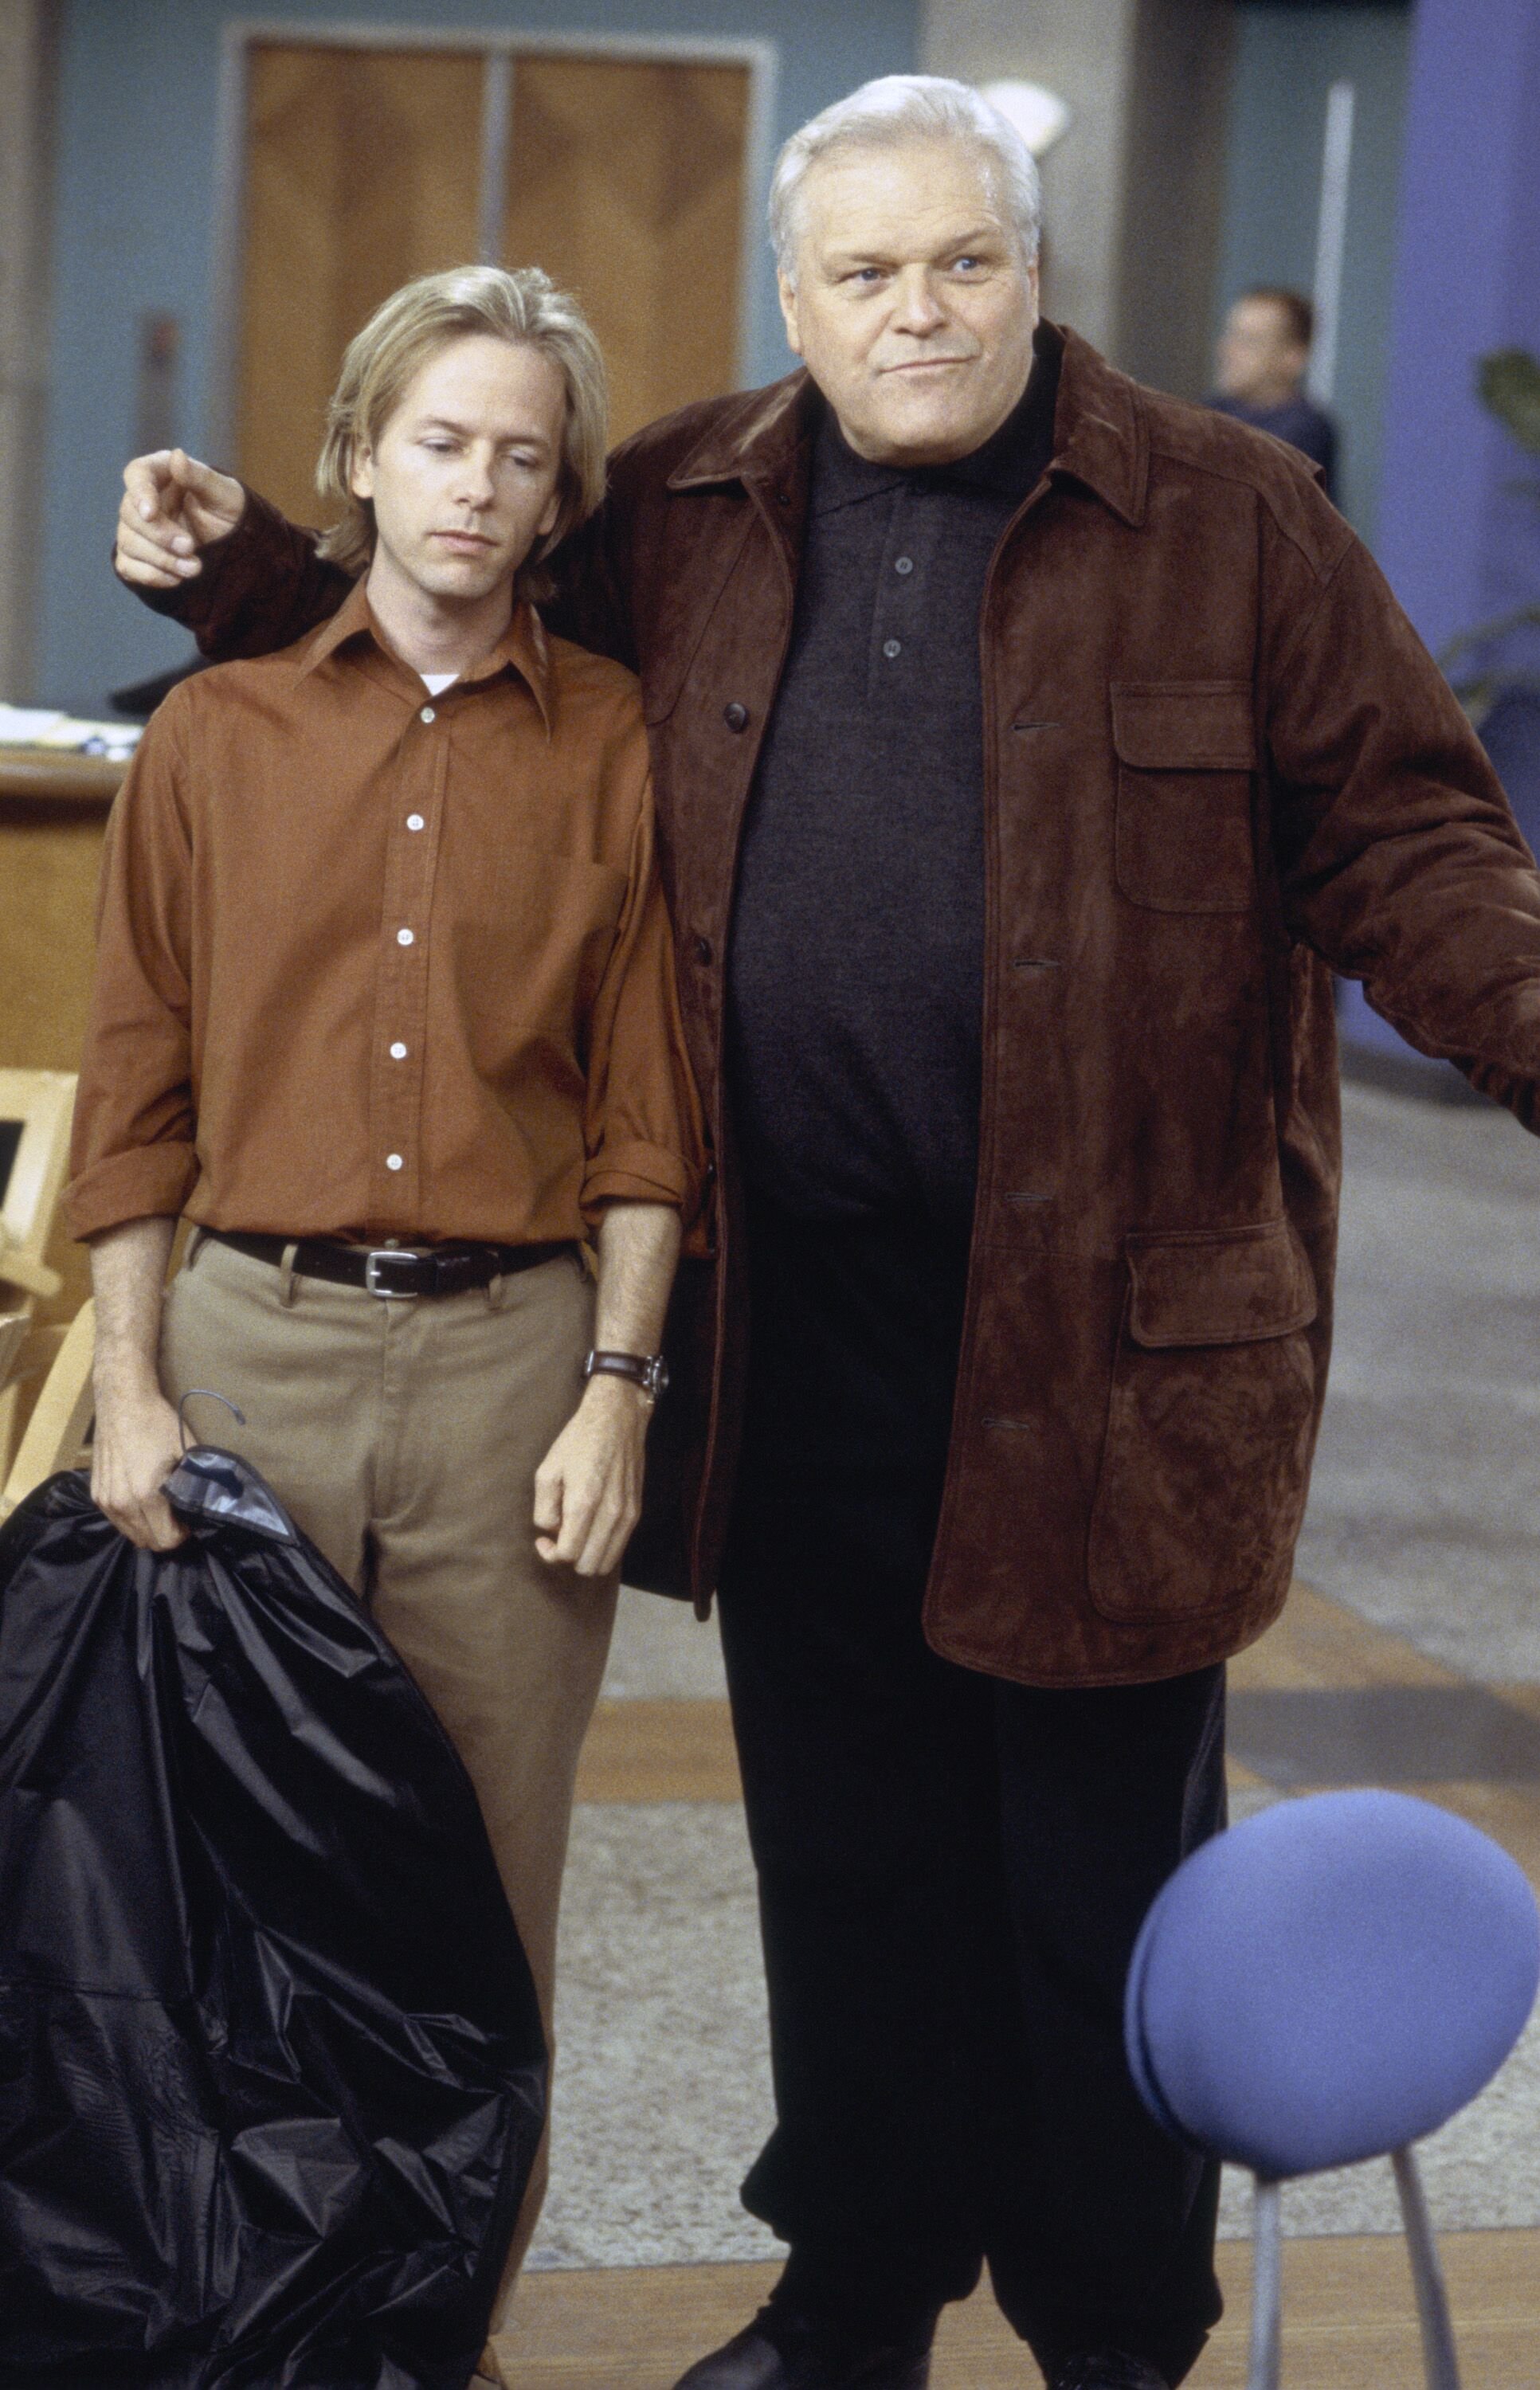 "Nina See's Red Pt. 2" Episode 15 -- Air Date 02/16/1999 -- David Spade as Dennis Finch, Brian Dennehy as Red Finch | Photo: Getty Images